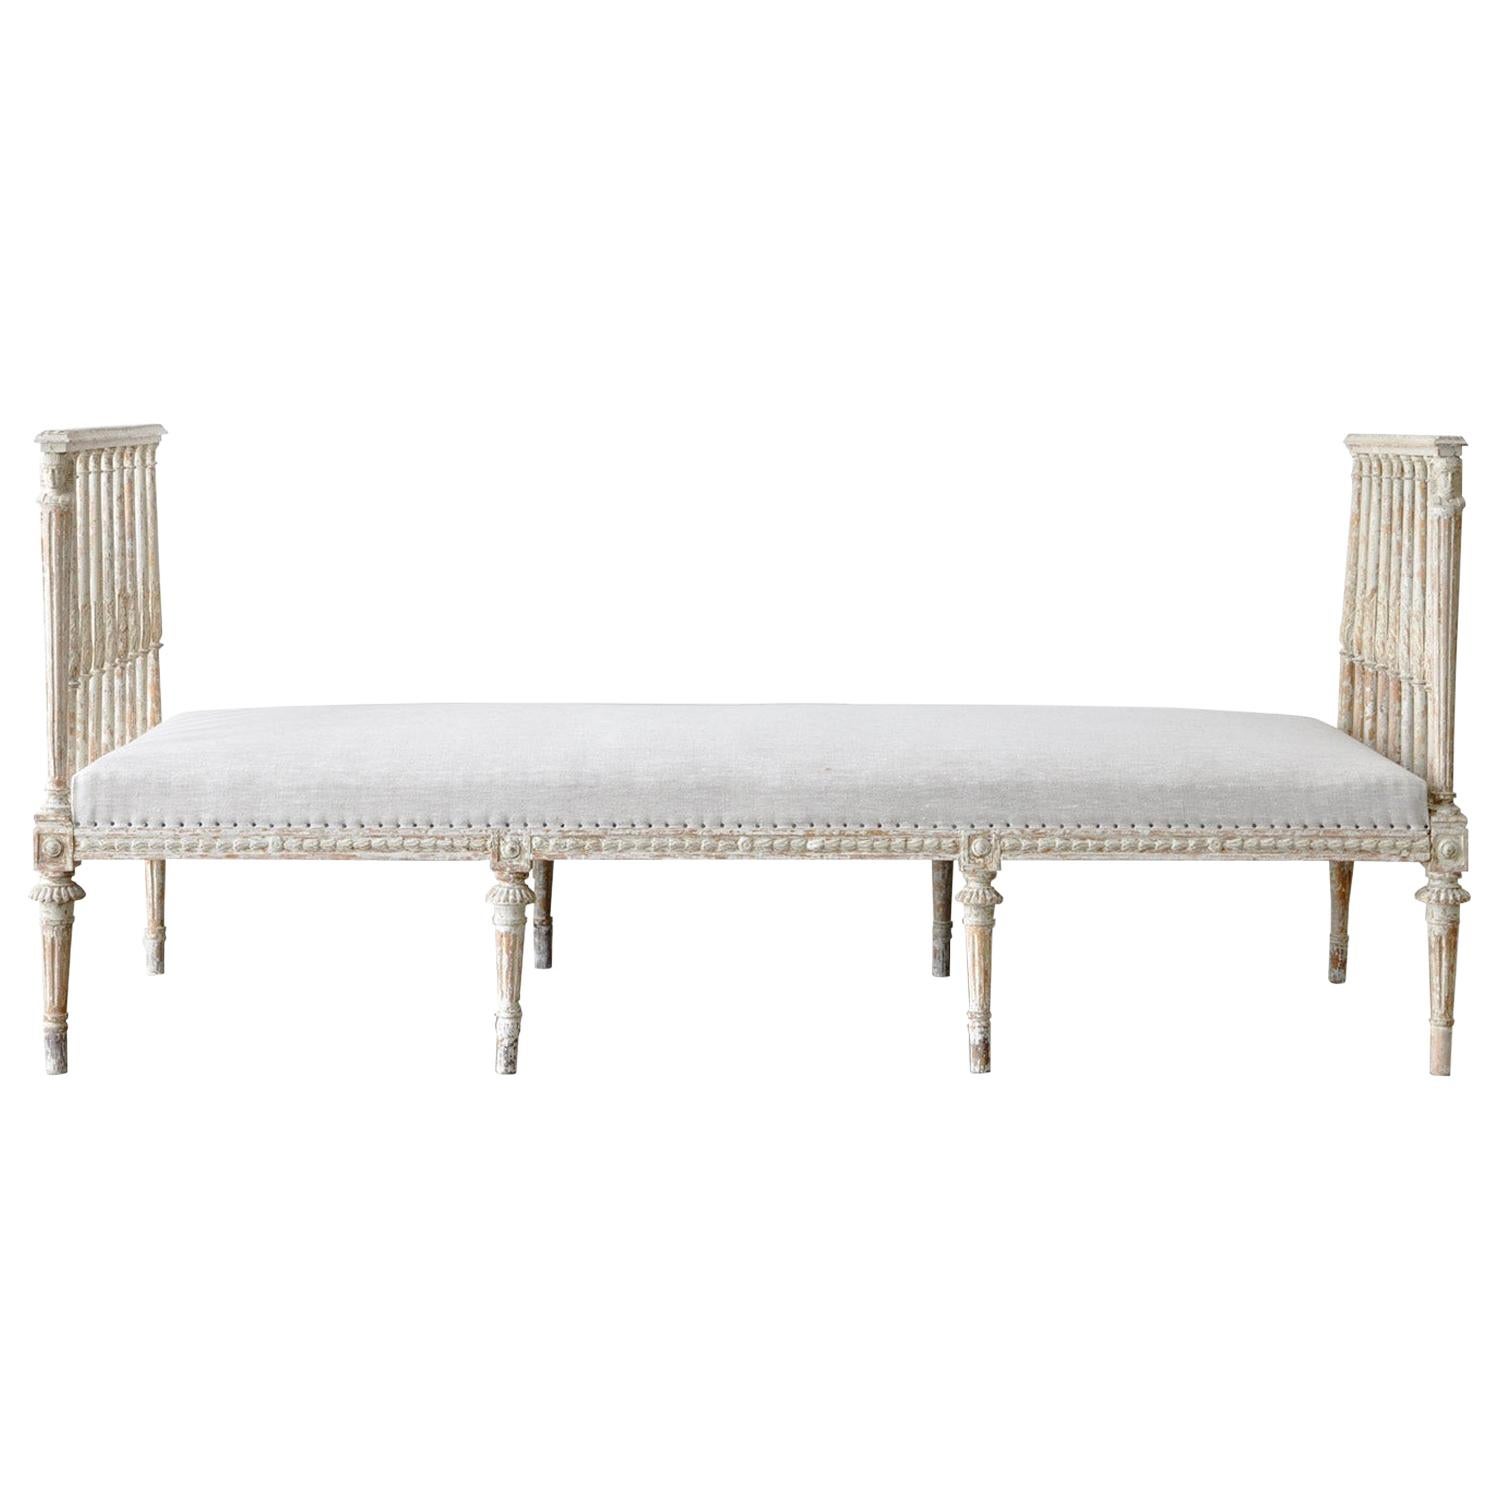 Period 18th Century Gustavian Reupholstered Day Bed in Original Paint